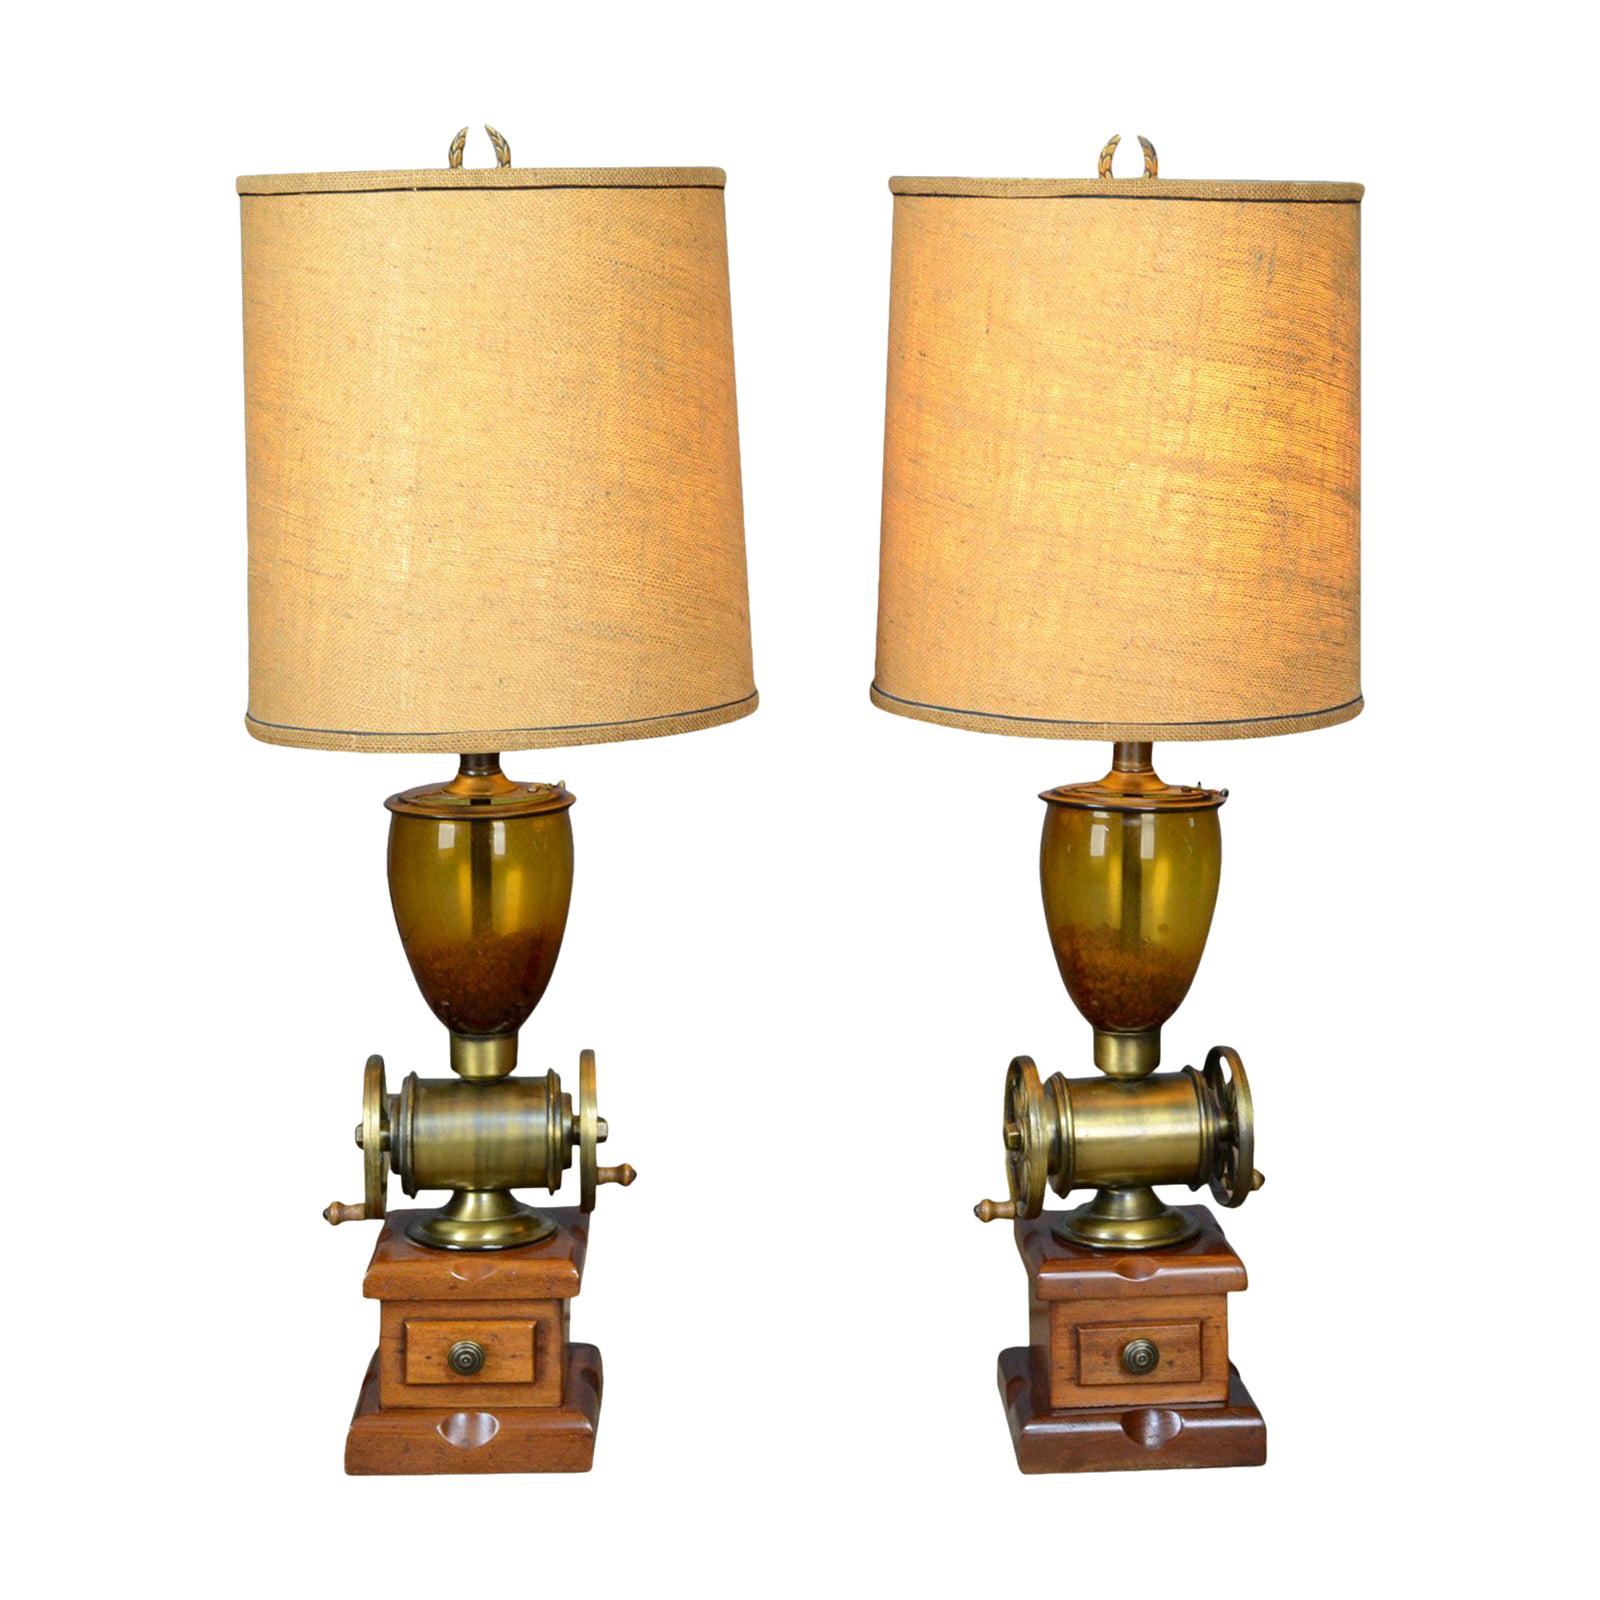 Pair of Large Vintage Table Lamps in the Form of Coffee Grinders